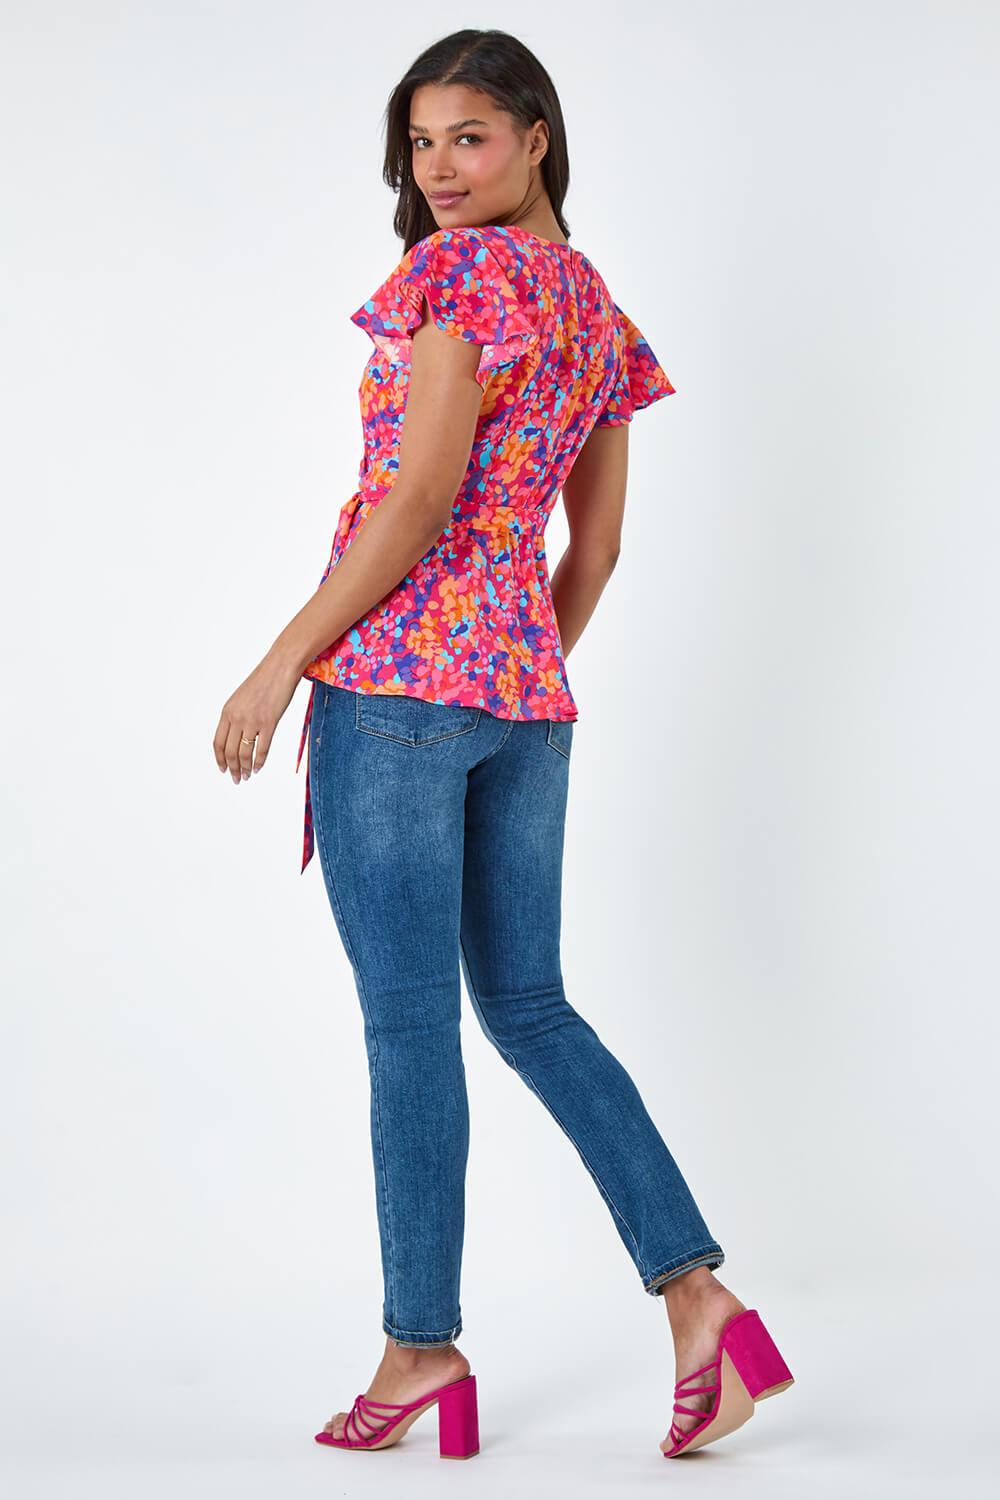 PINK Floral Print Frill Detail Top, Image 3 of 5